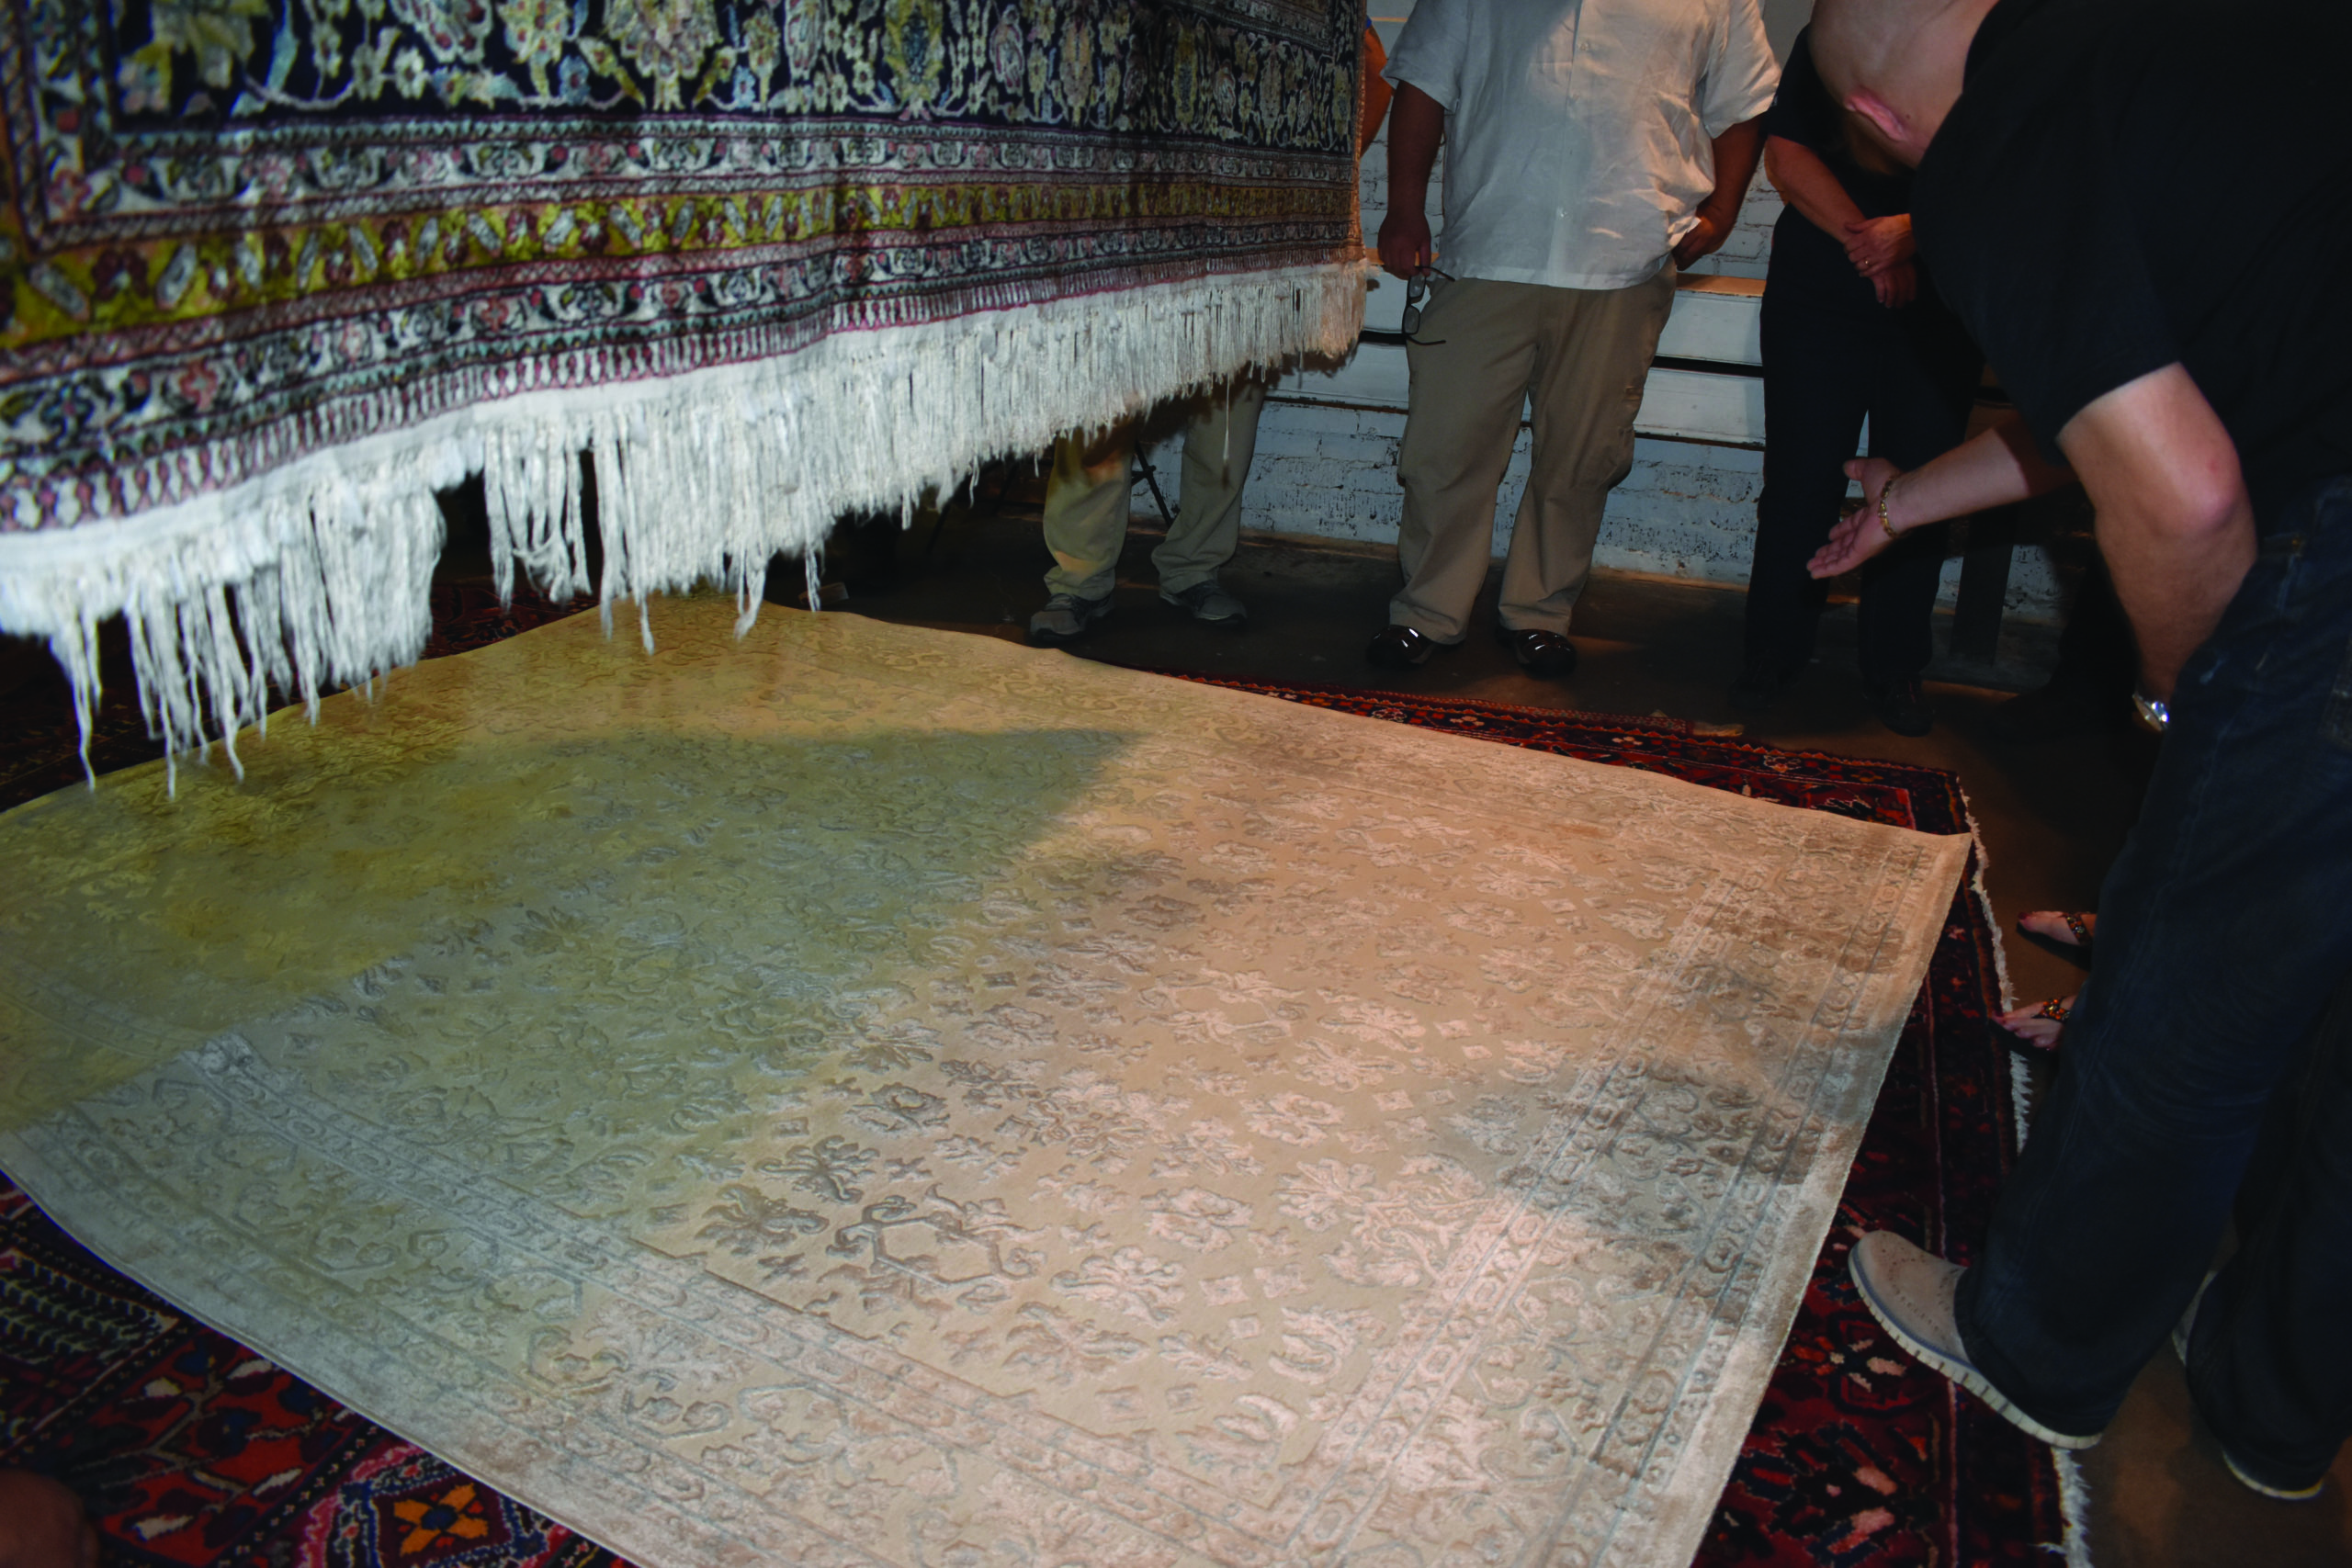 Image 5 - Viscose rayon rugs in the dry room